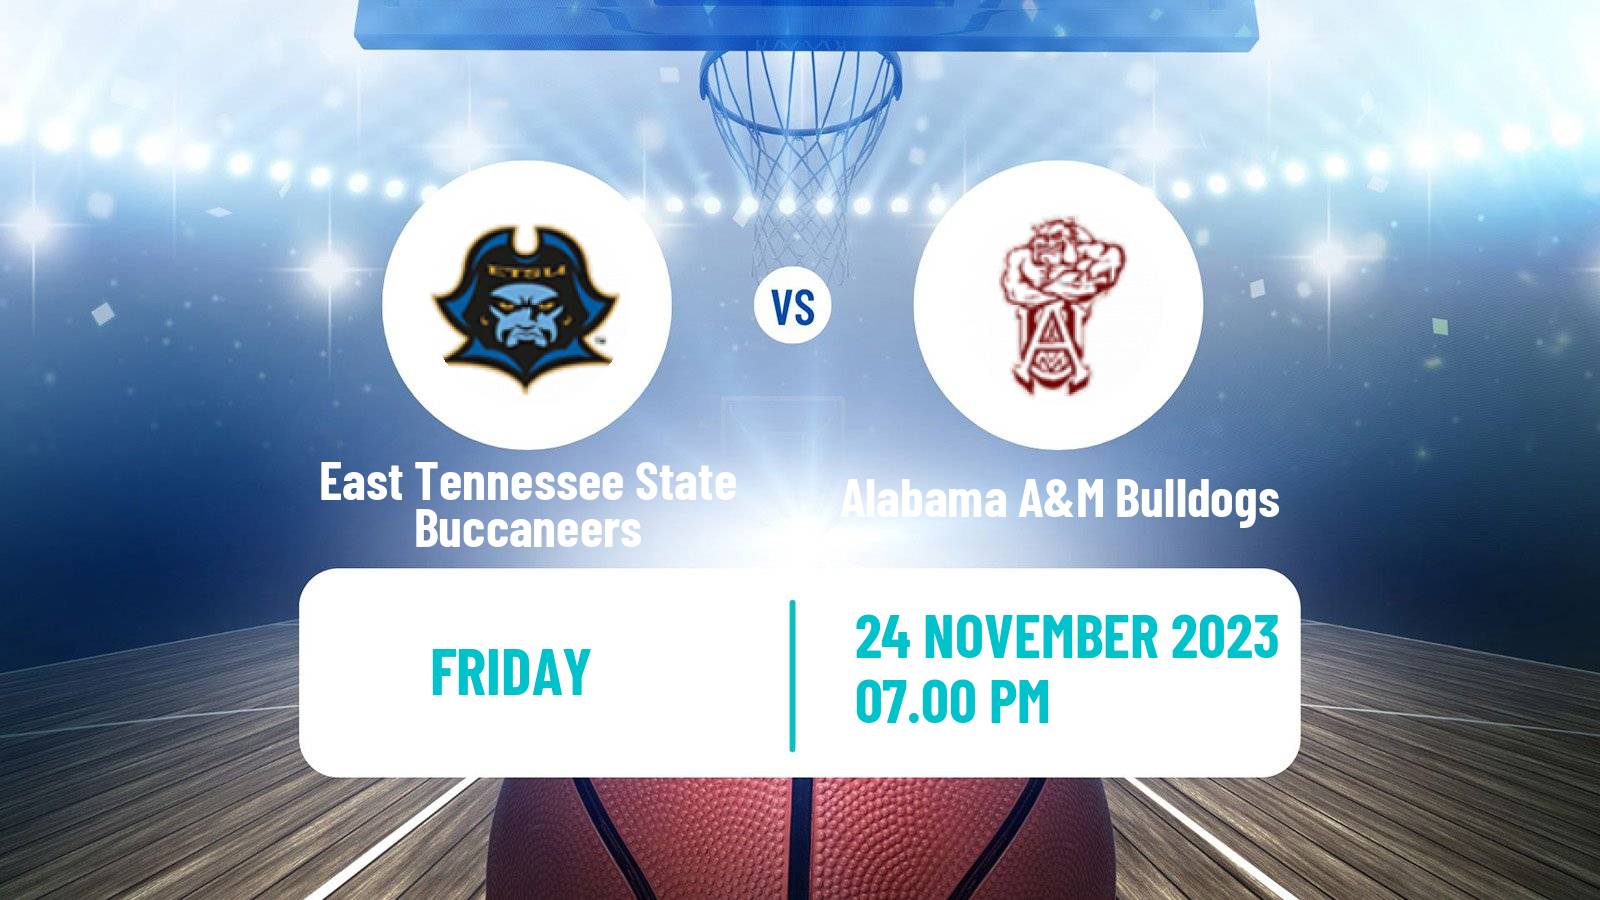 Basketball NCAA College Basketball East Tennessee State Buccaneers - Alabama A&M Bulldogs